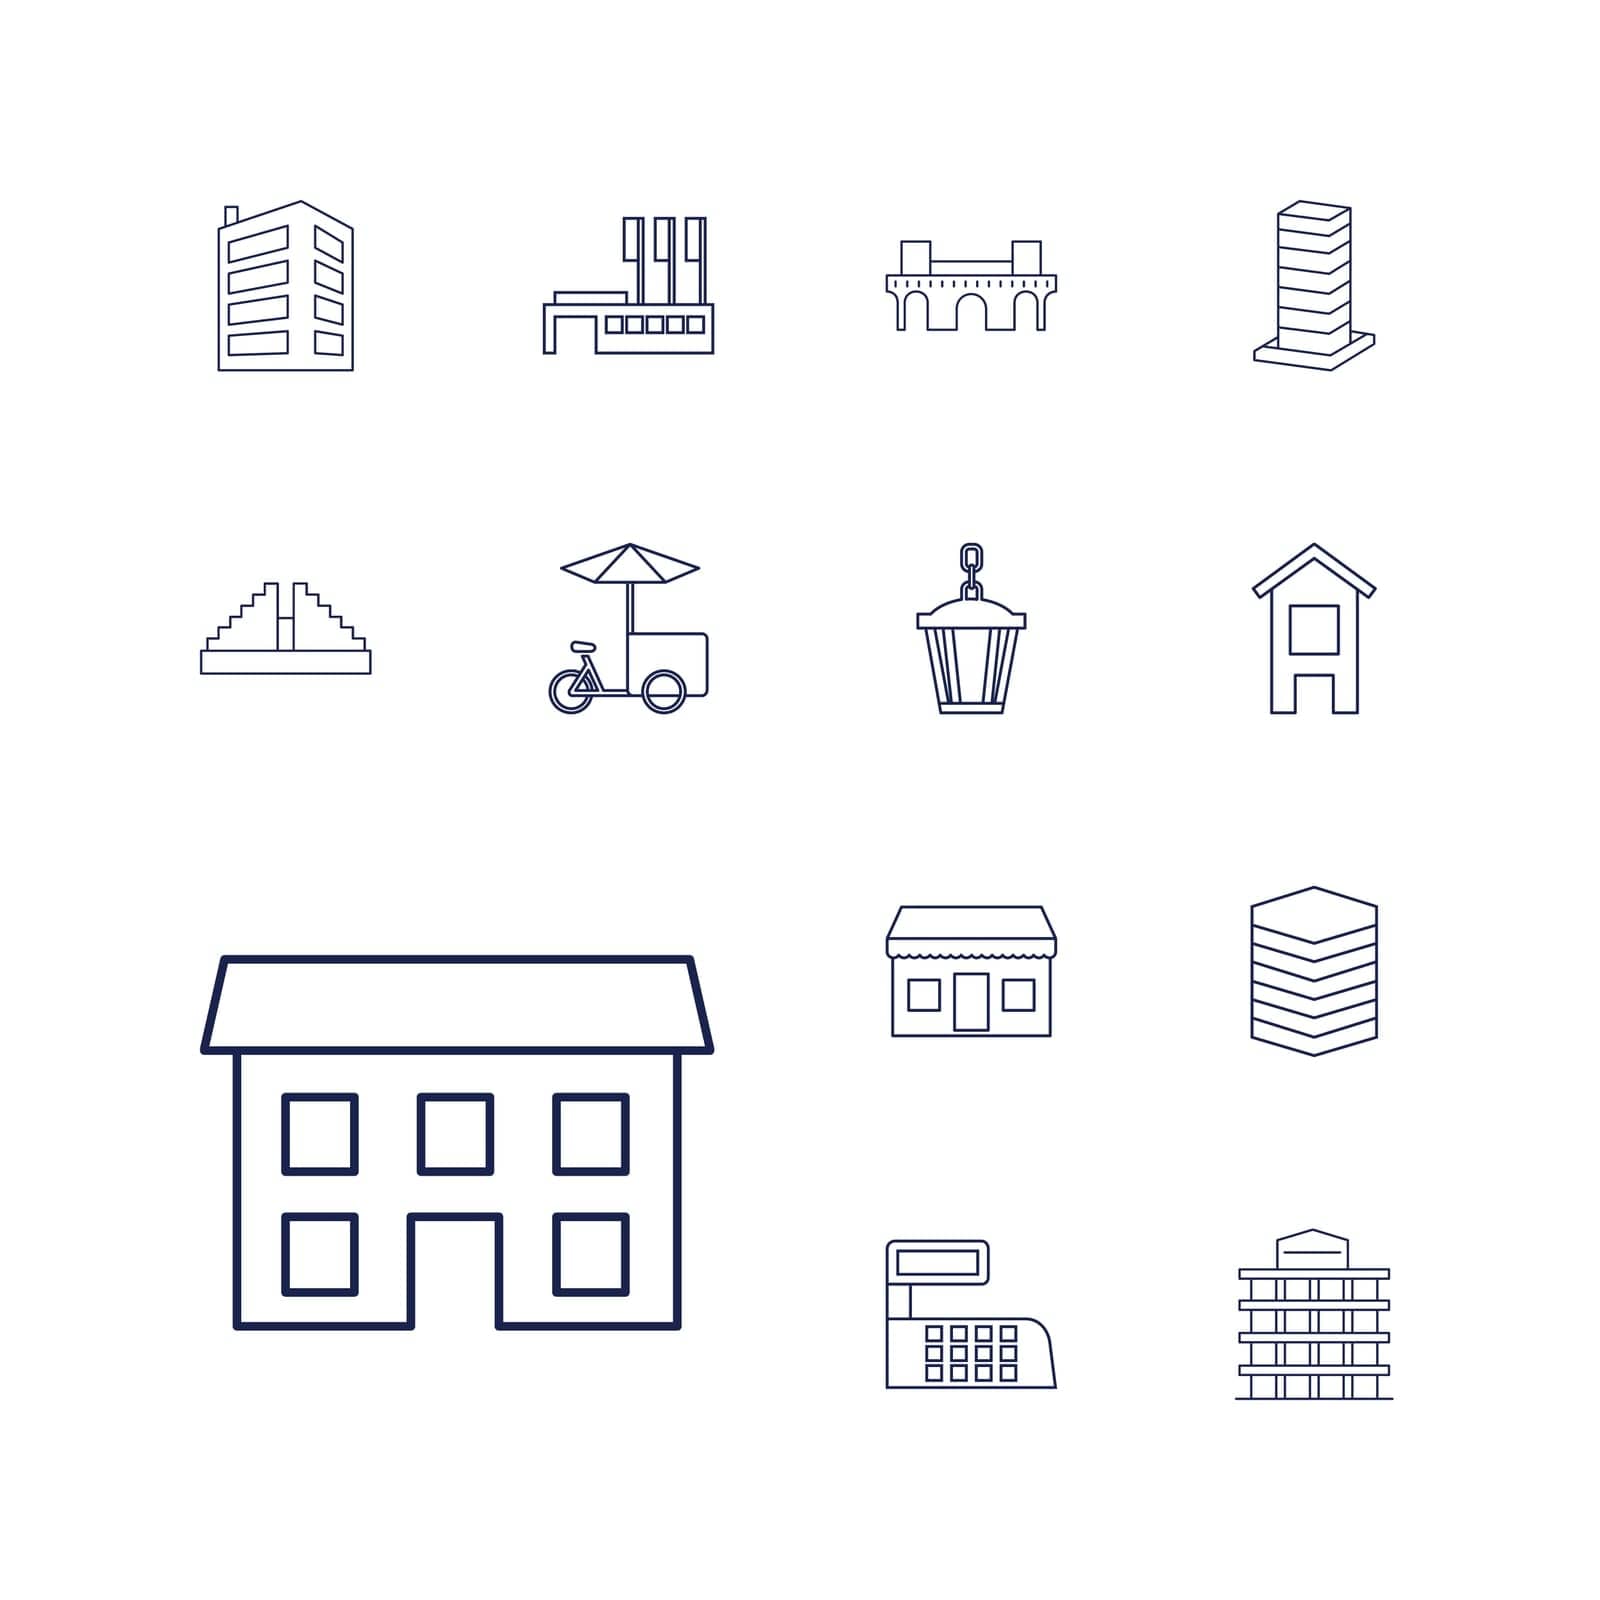 symbol,city,chichen,concept,icon,sign,isolated,office,house,building,cart,government,white,modern,street,design,vector,element,architecture,set,itza,shape,business,town,center,estate,lamp,skyscraper,store,food,structure,home,fast,residential,urban,illustration,window,bridge,apartment,object